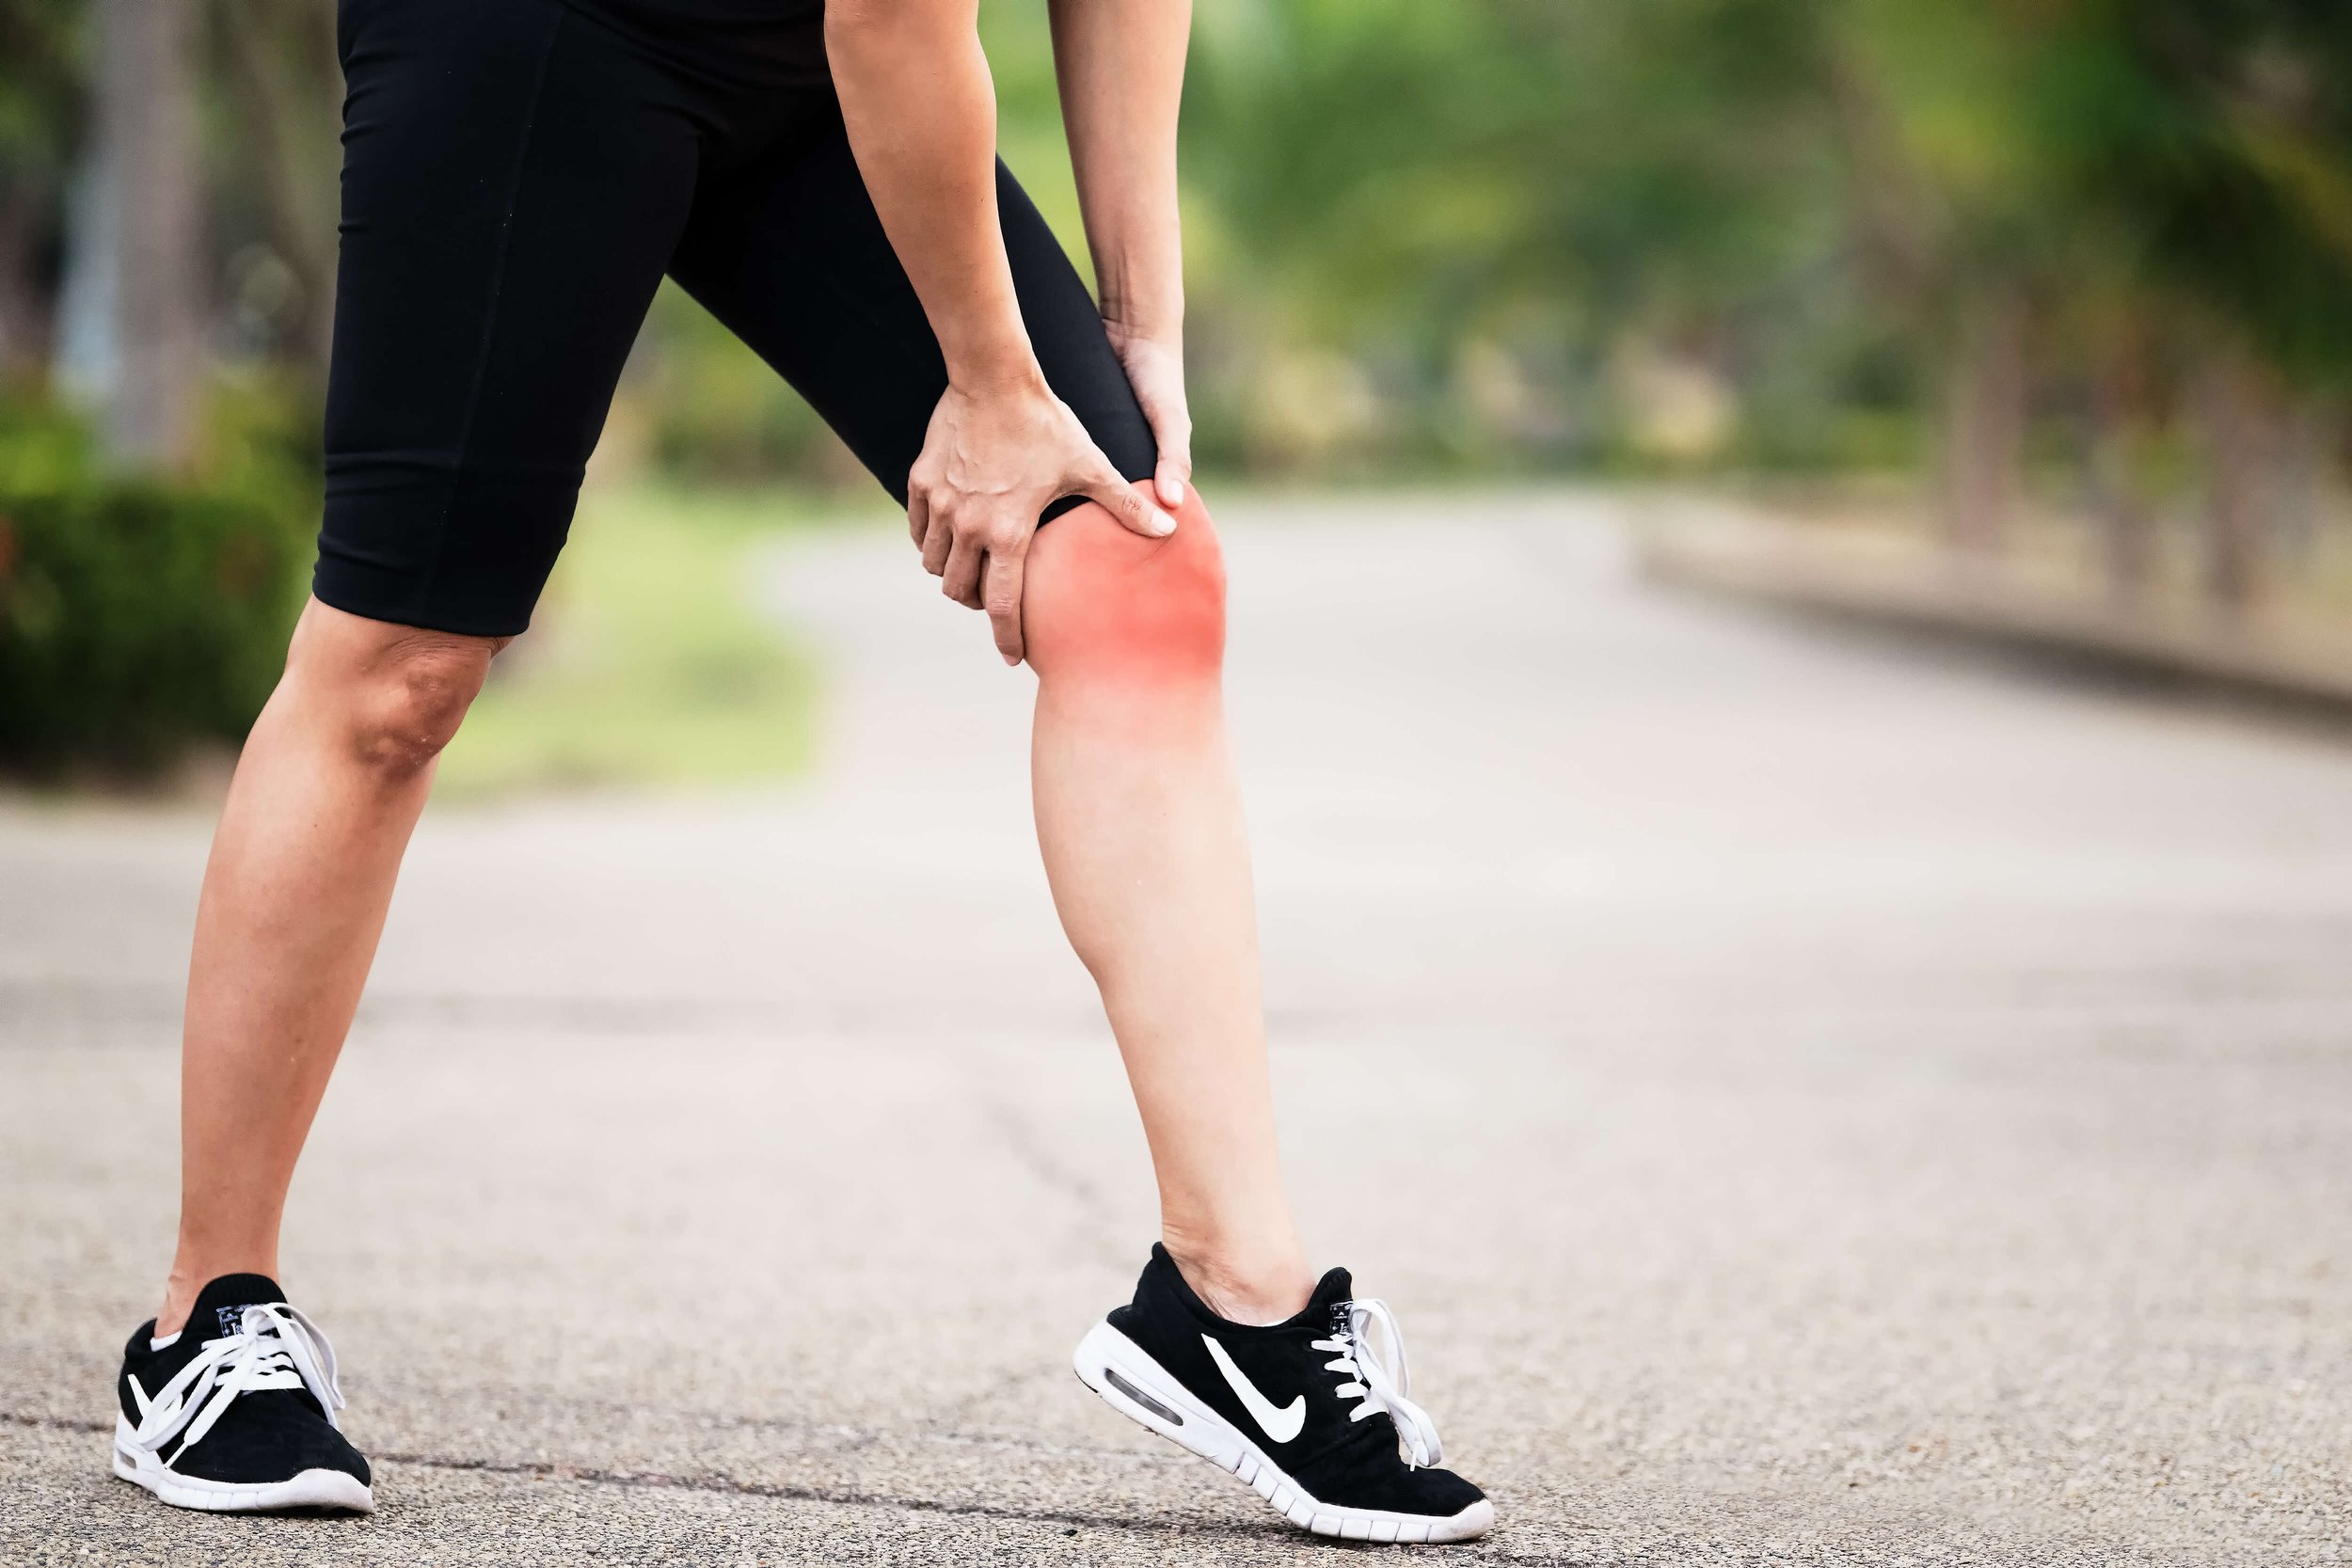 7 Ways to Strengthen your Anterior Cruciate Ligament (ACL)